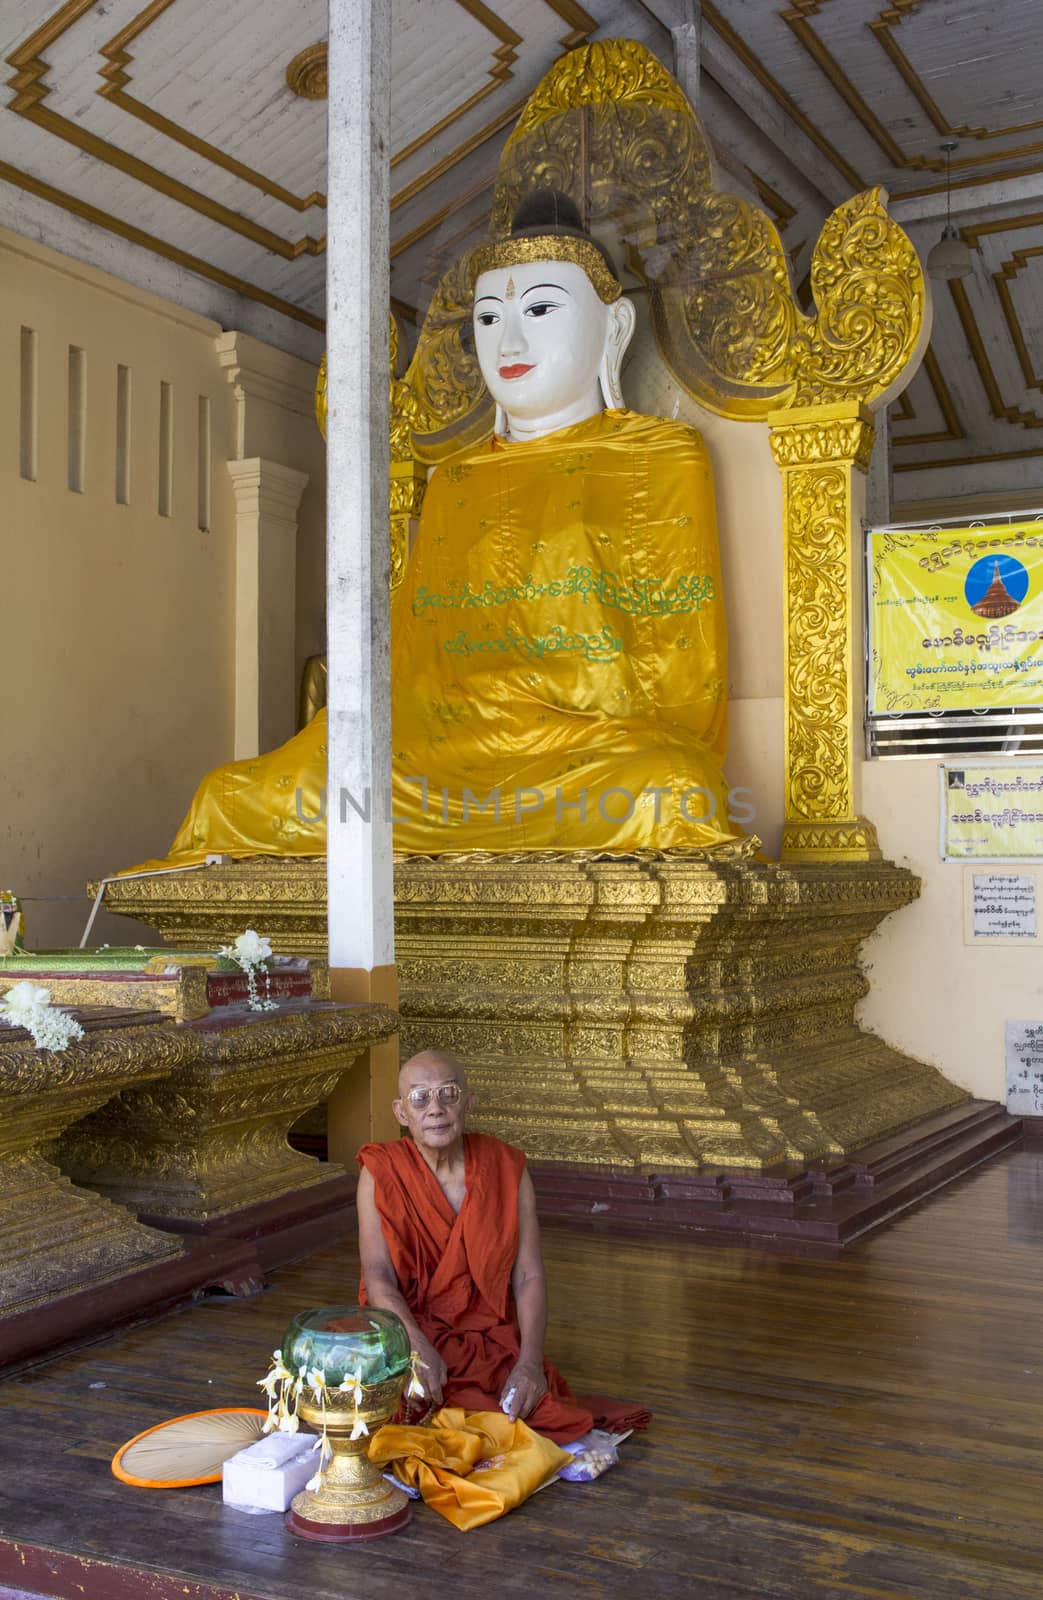 Yangon, Myanmar-May 6th 2014: A monk meditates beside a buddha statue in Shwedagon Pagoda. Some structures are reputed to be 2,500 years old